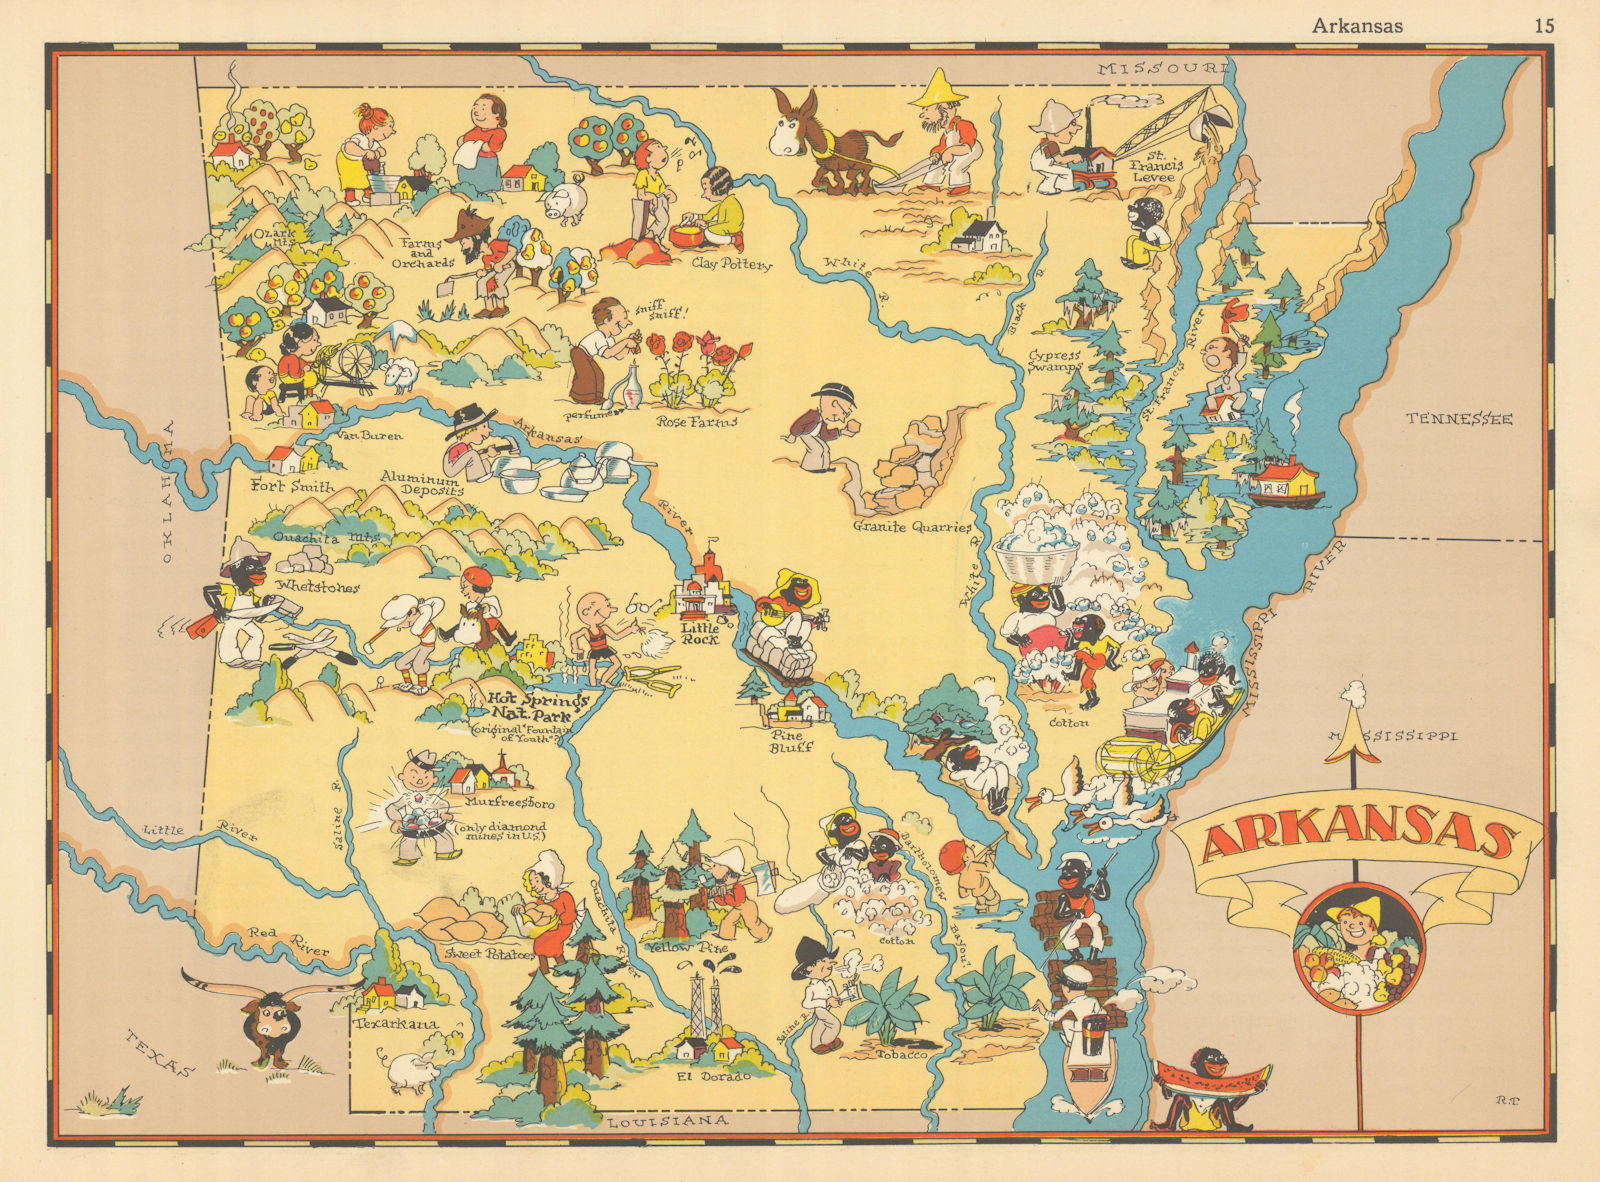 Associate Product Arkansas. Pictorial state map by Ruth Taylor White 1935 old vintage chart